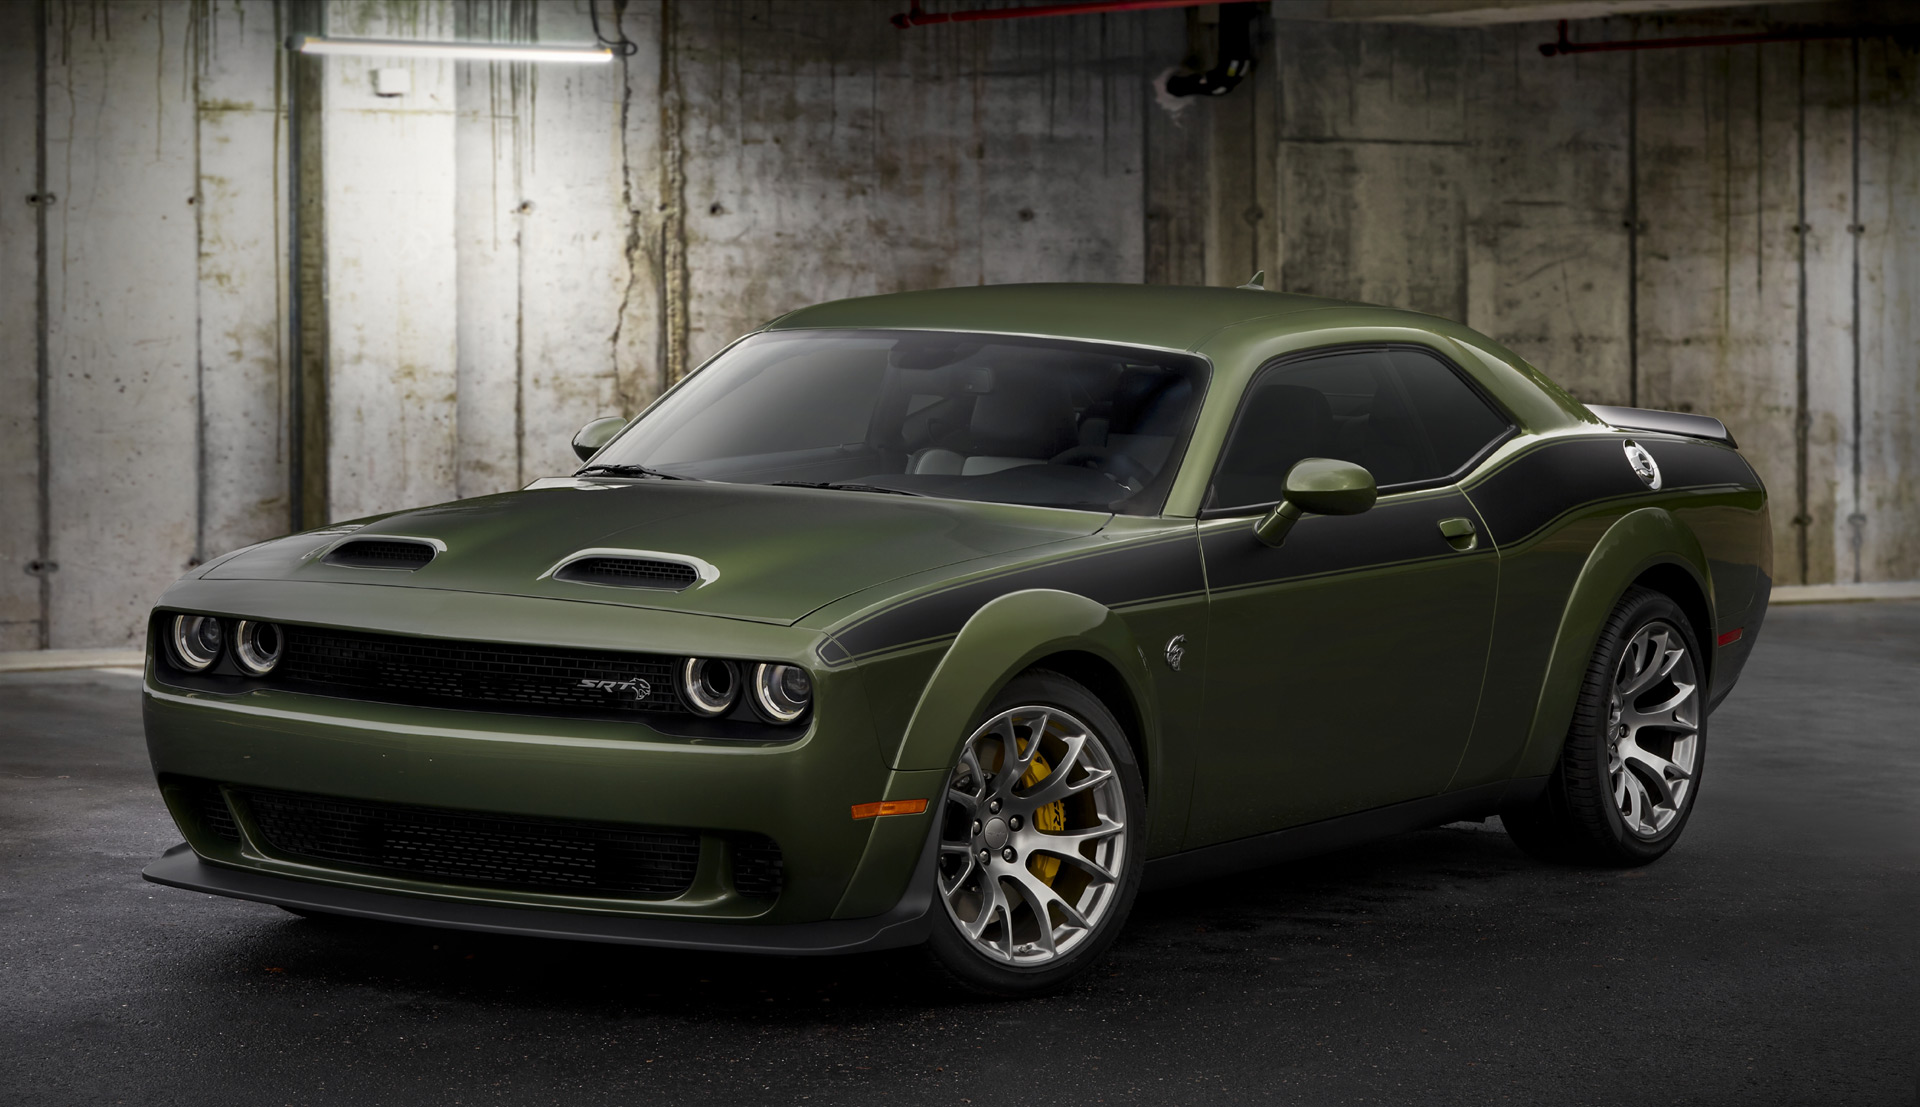 2022 Dodge Challenger prices and expert review - The Car Connection